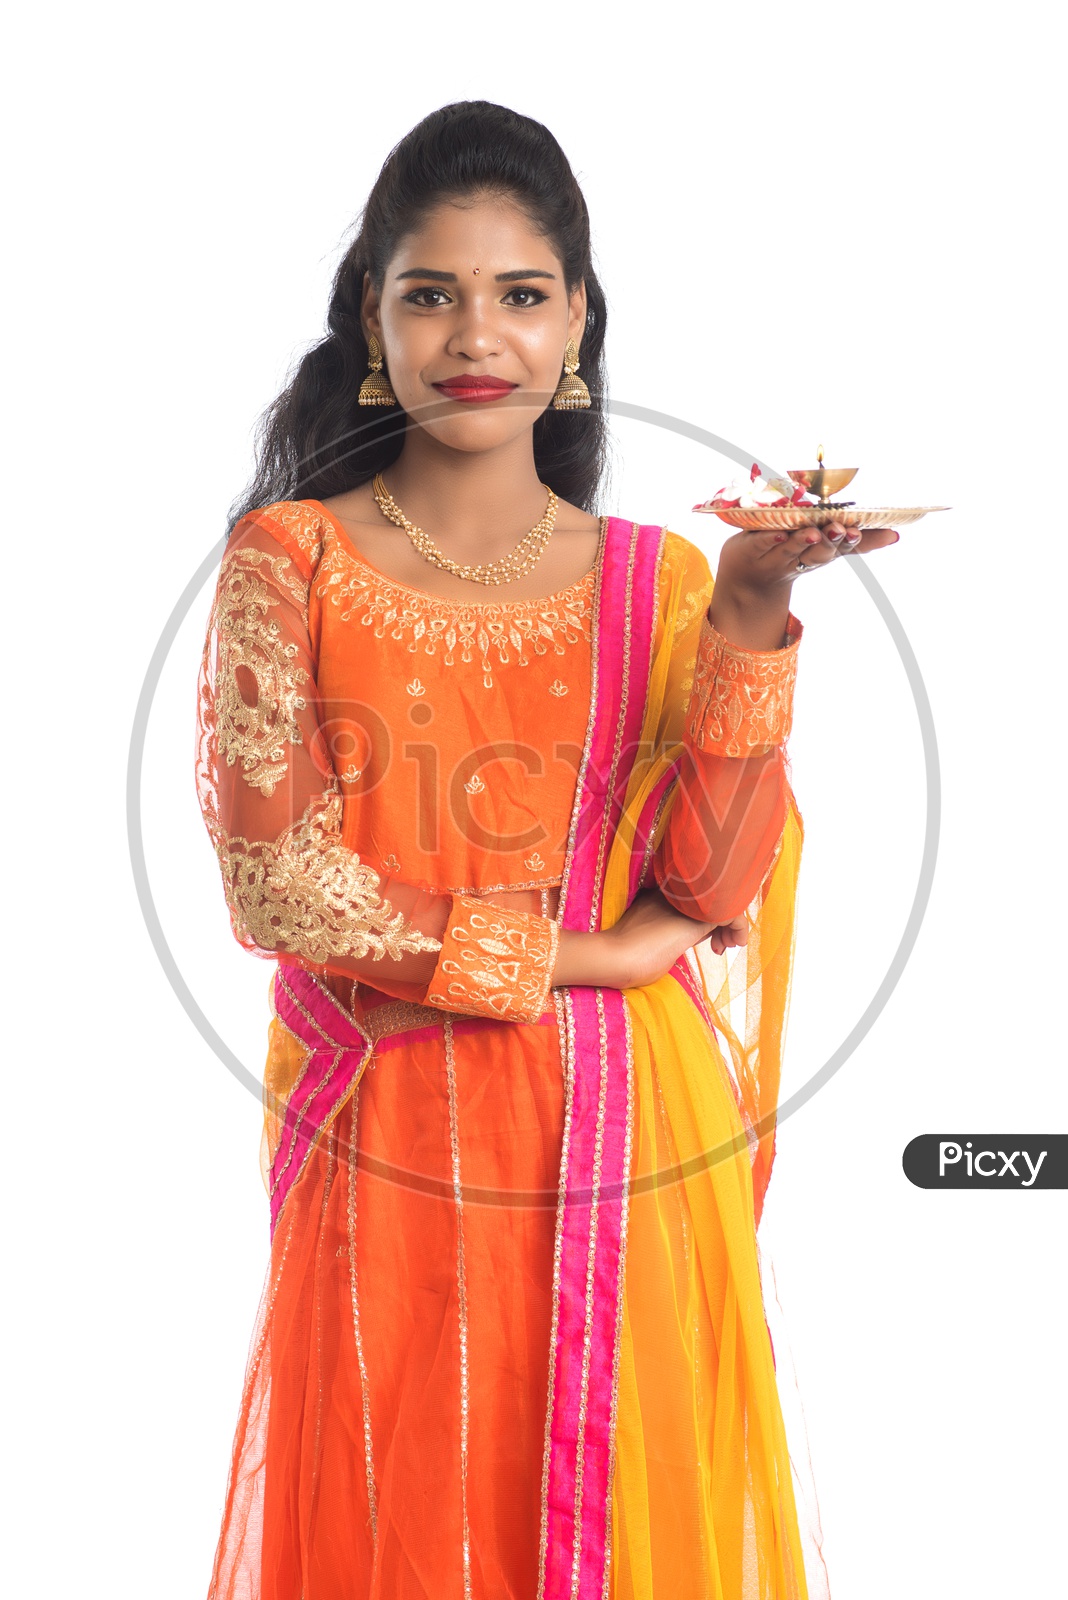 A Young Indian Traditional Woman With Pooja Thali Or Pooja Plates Holding In Hand With Smile Face On an Isolated White Background